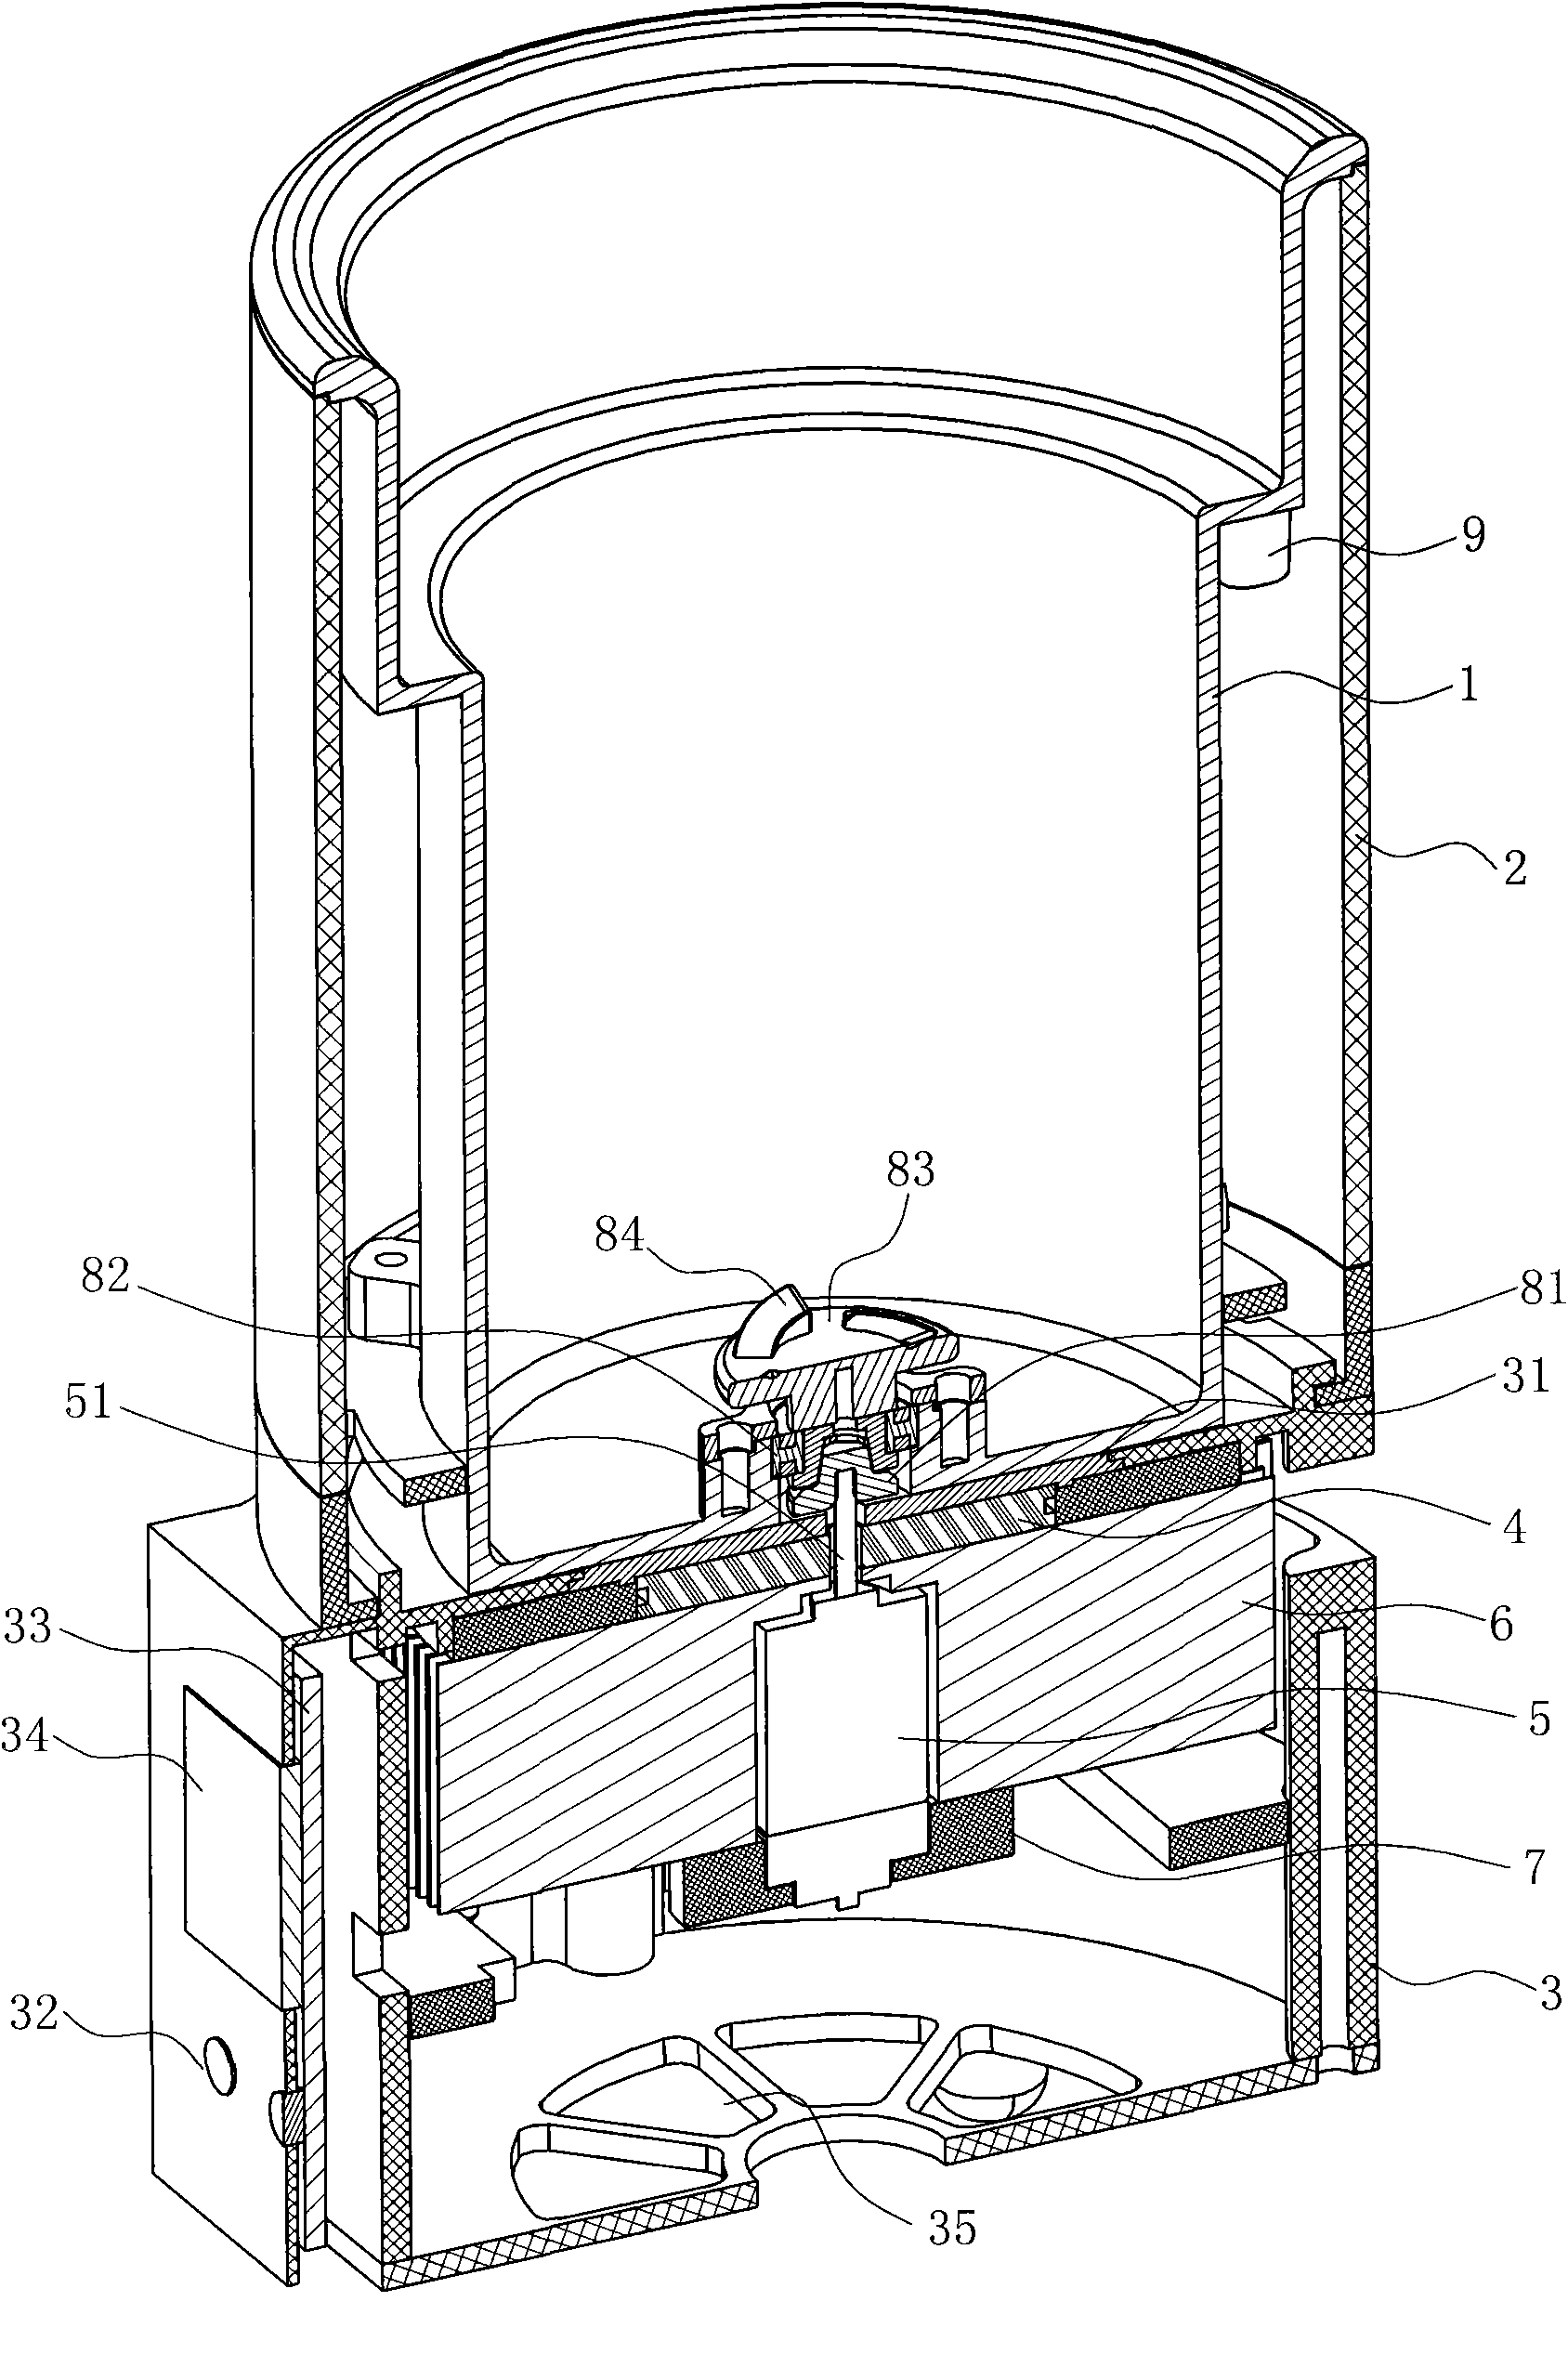 Fluid container capable of refrigerating and heating